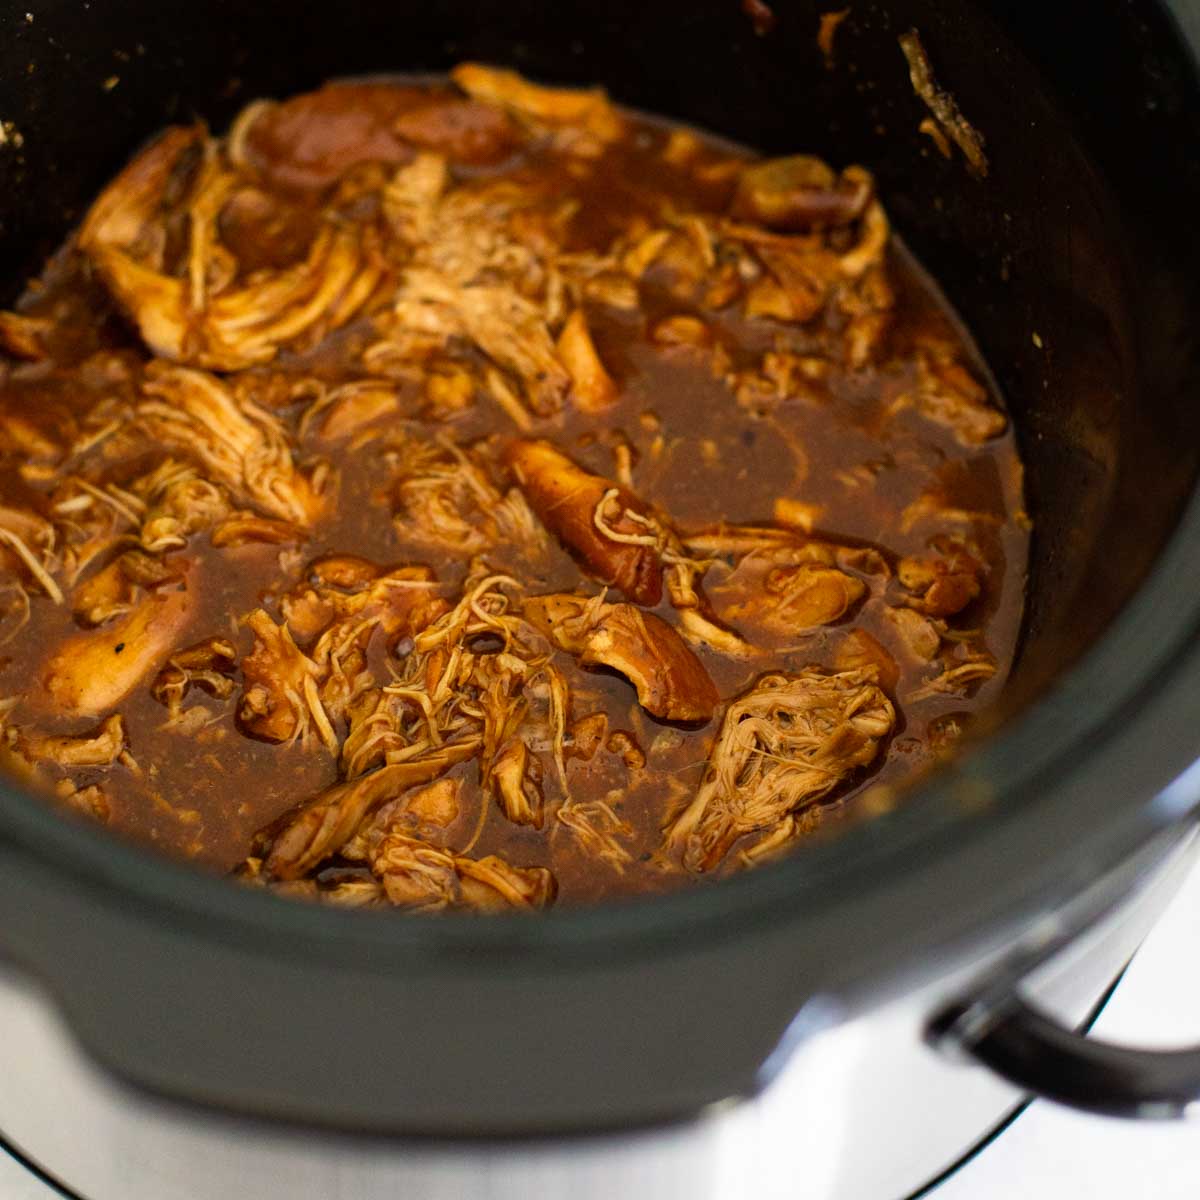 A Crockpot is filled with shredded bbq chicken thighs and bbq sauce.